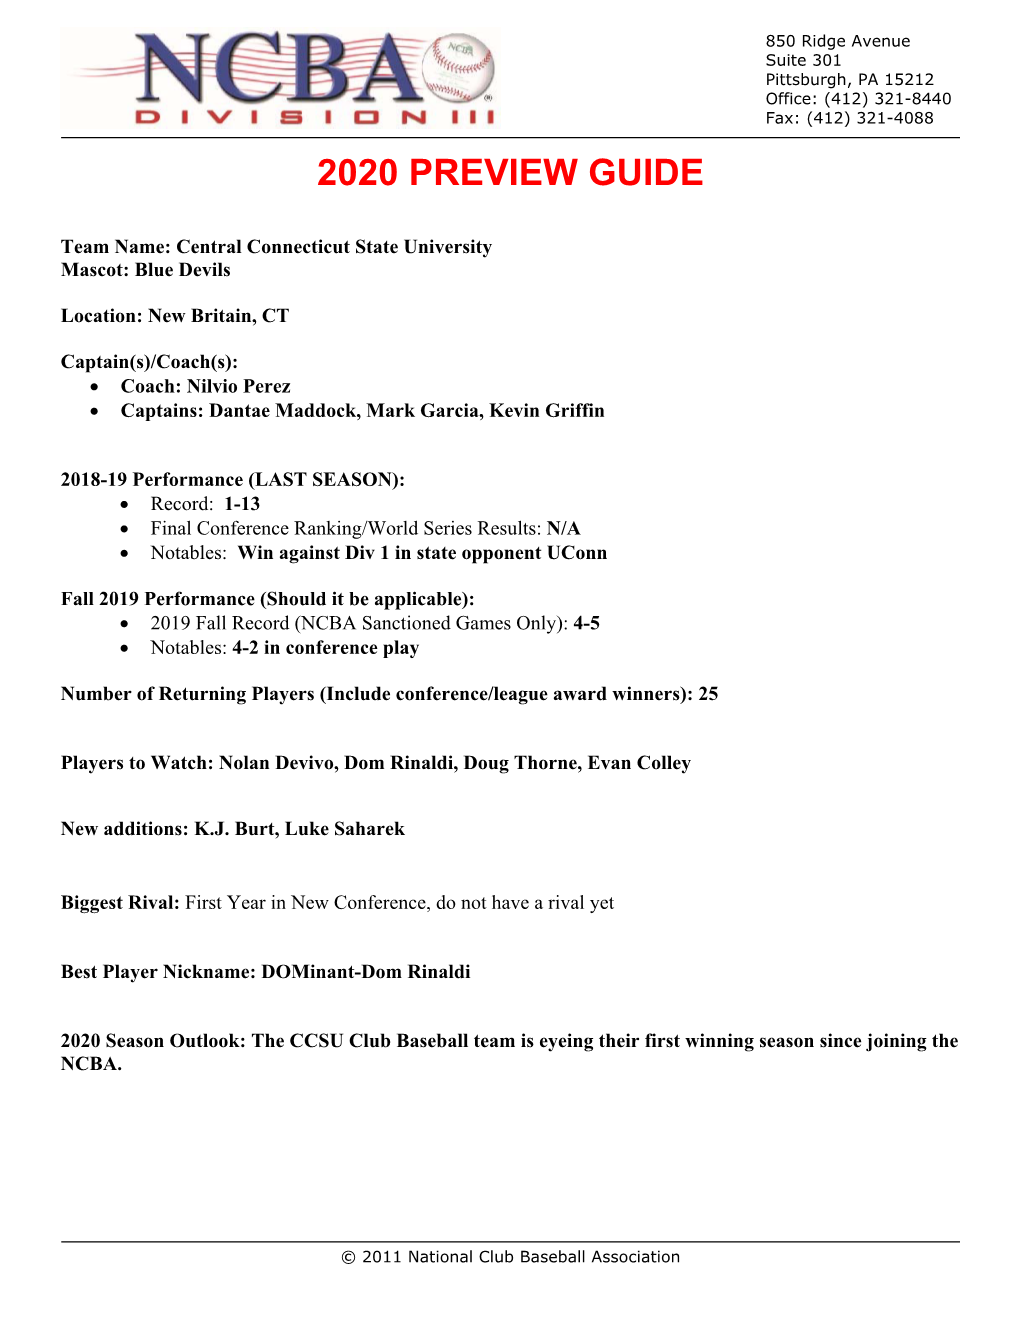 2020 Preview Guide